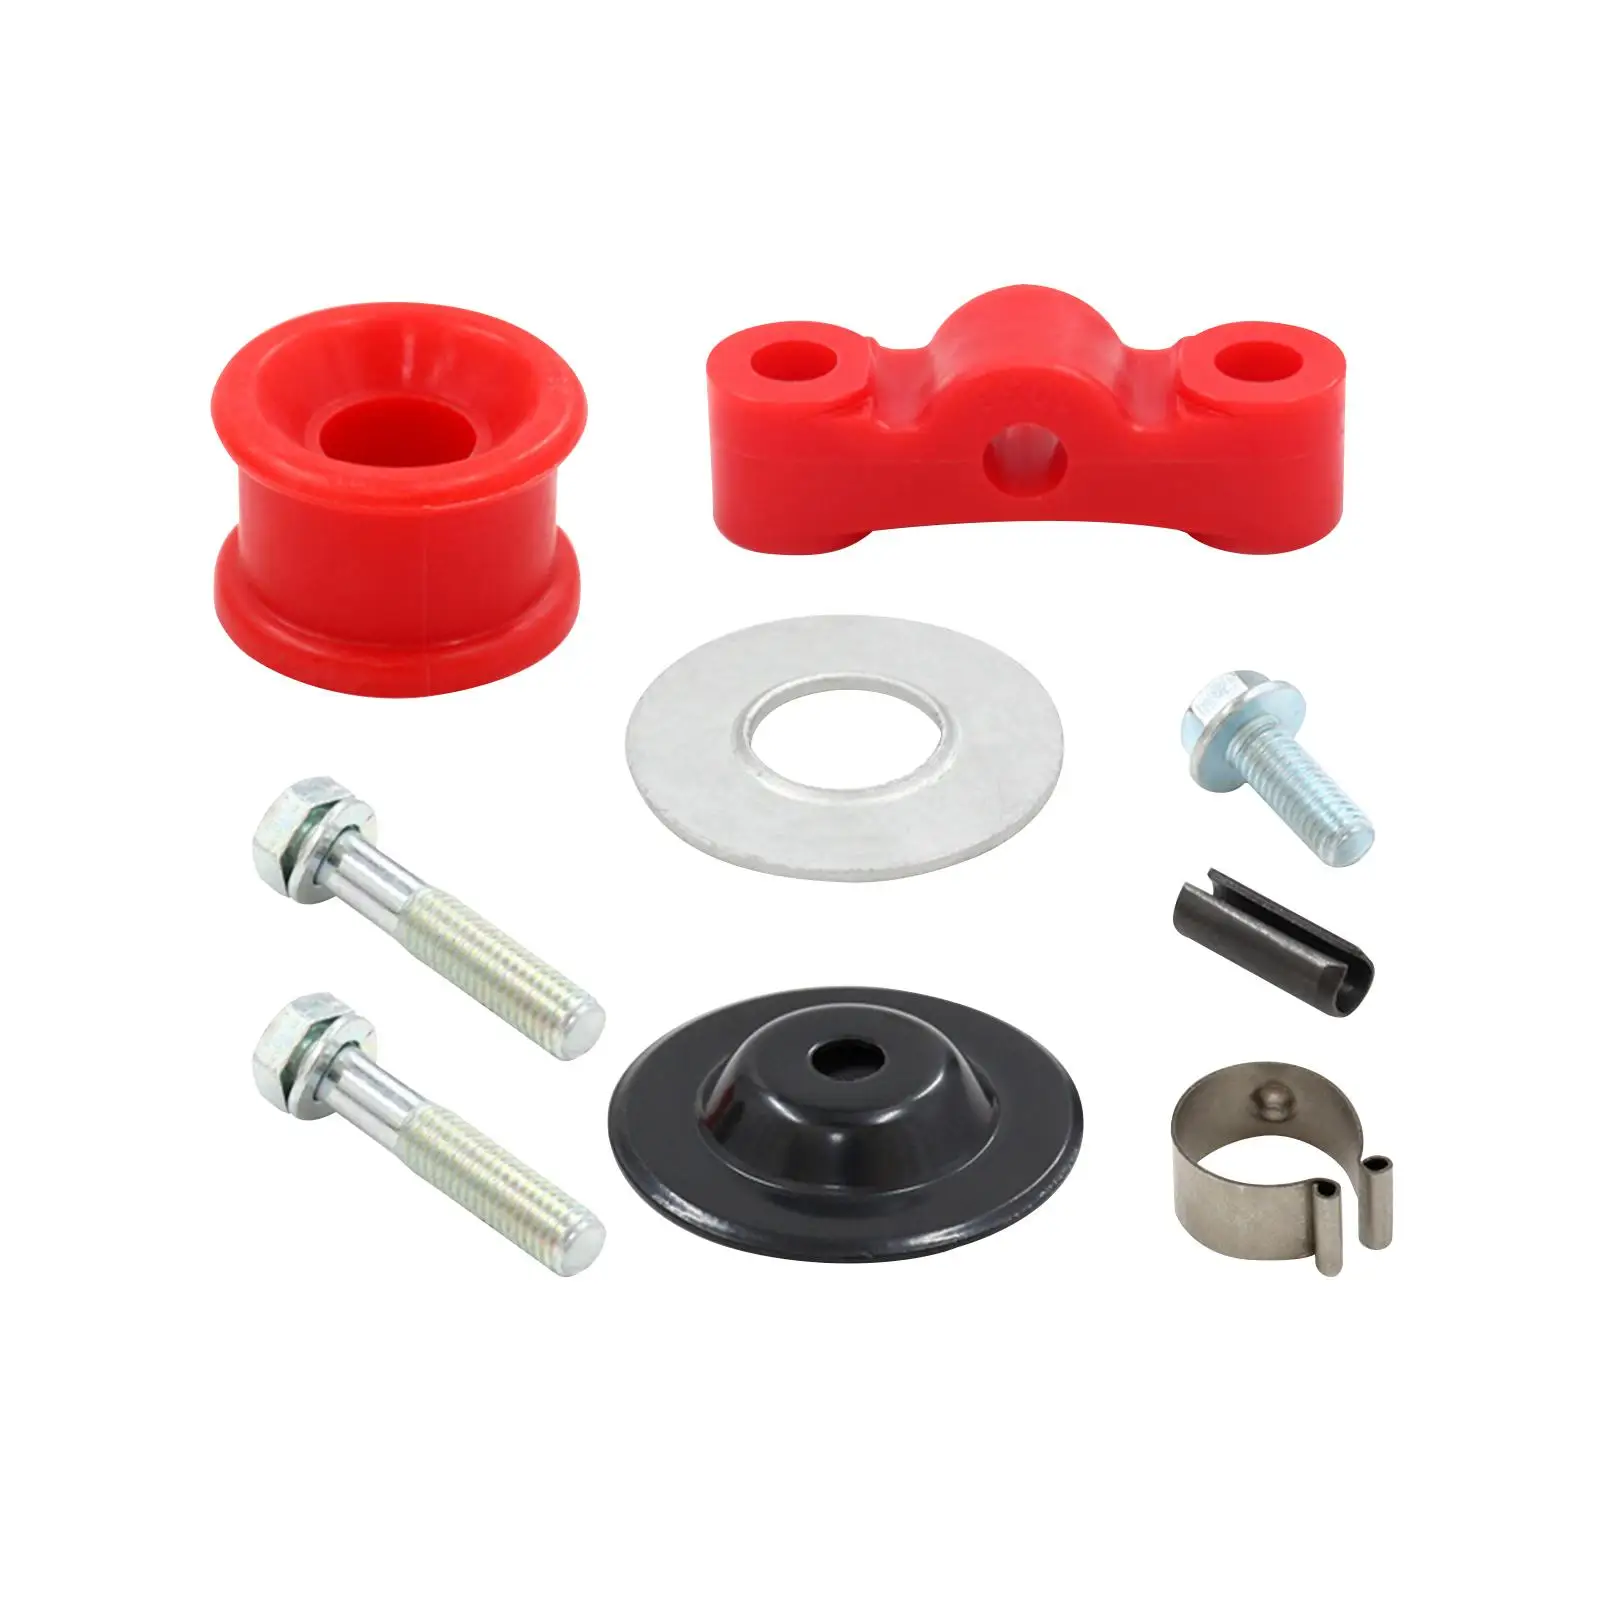 Shifter Stabilizer Bushing Kit for Integra B Series and Energy Bushing Accs Car Shifter Linkage Hardware Pin and Clip